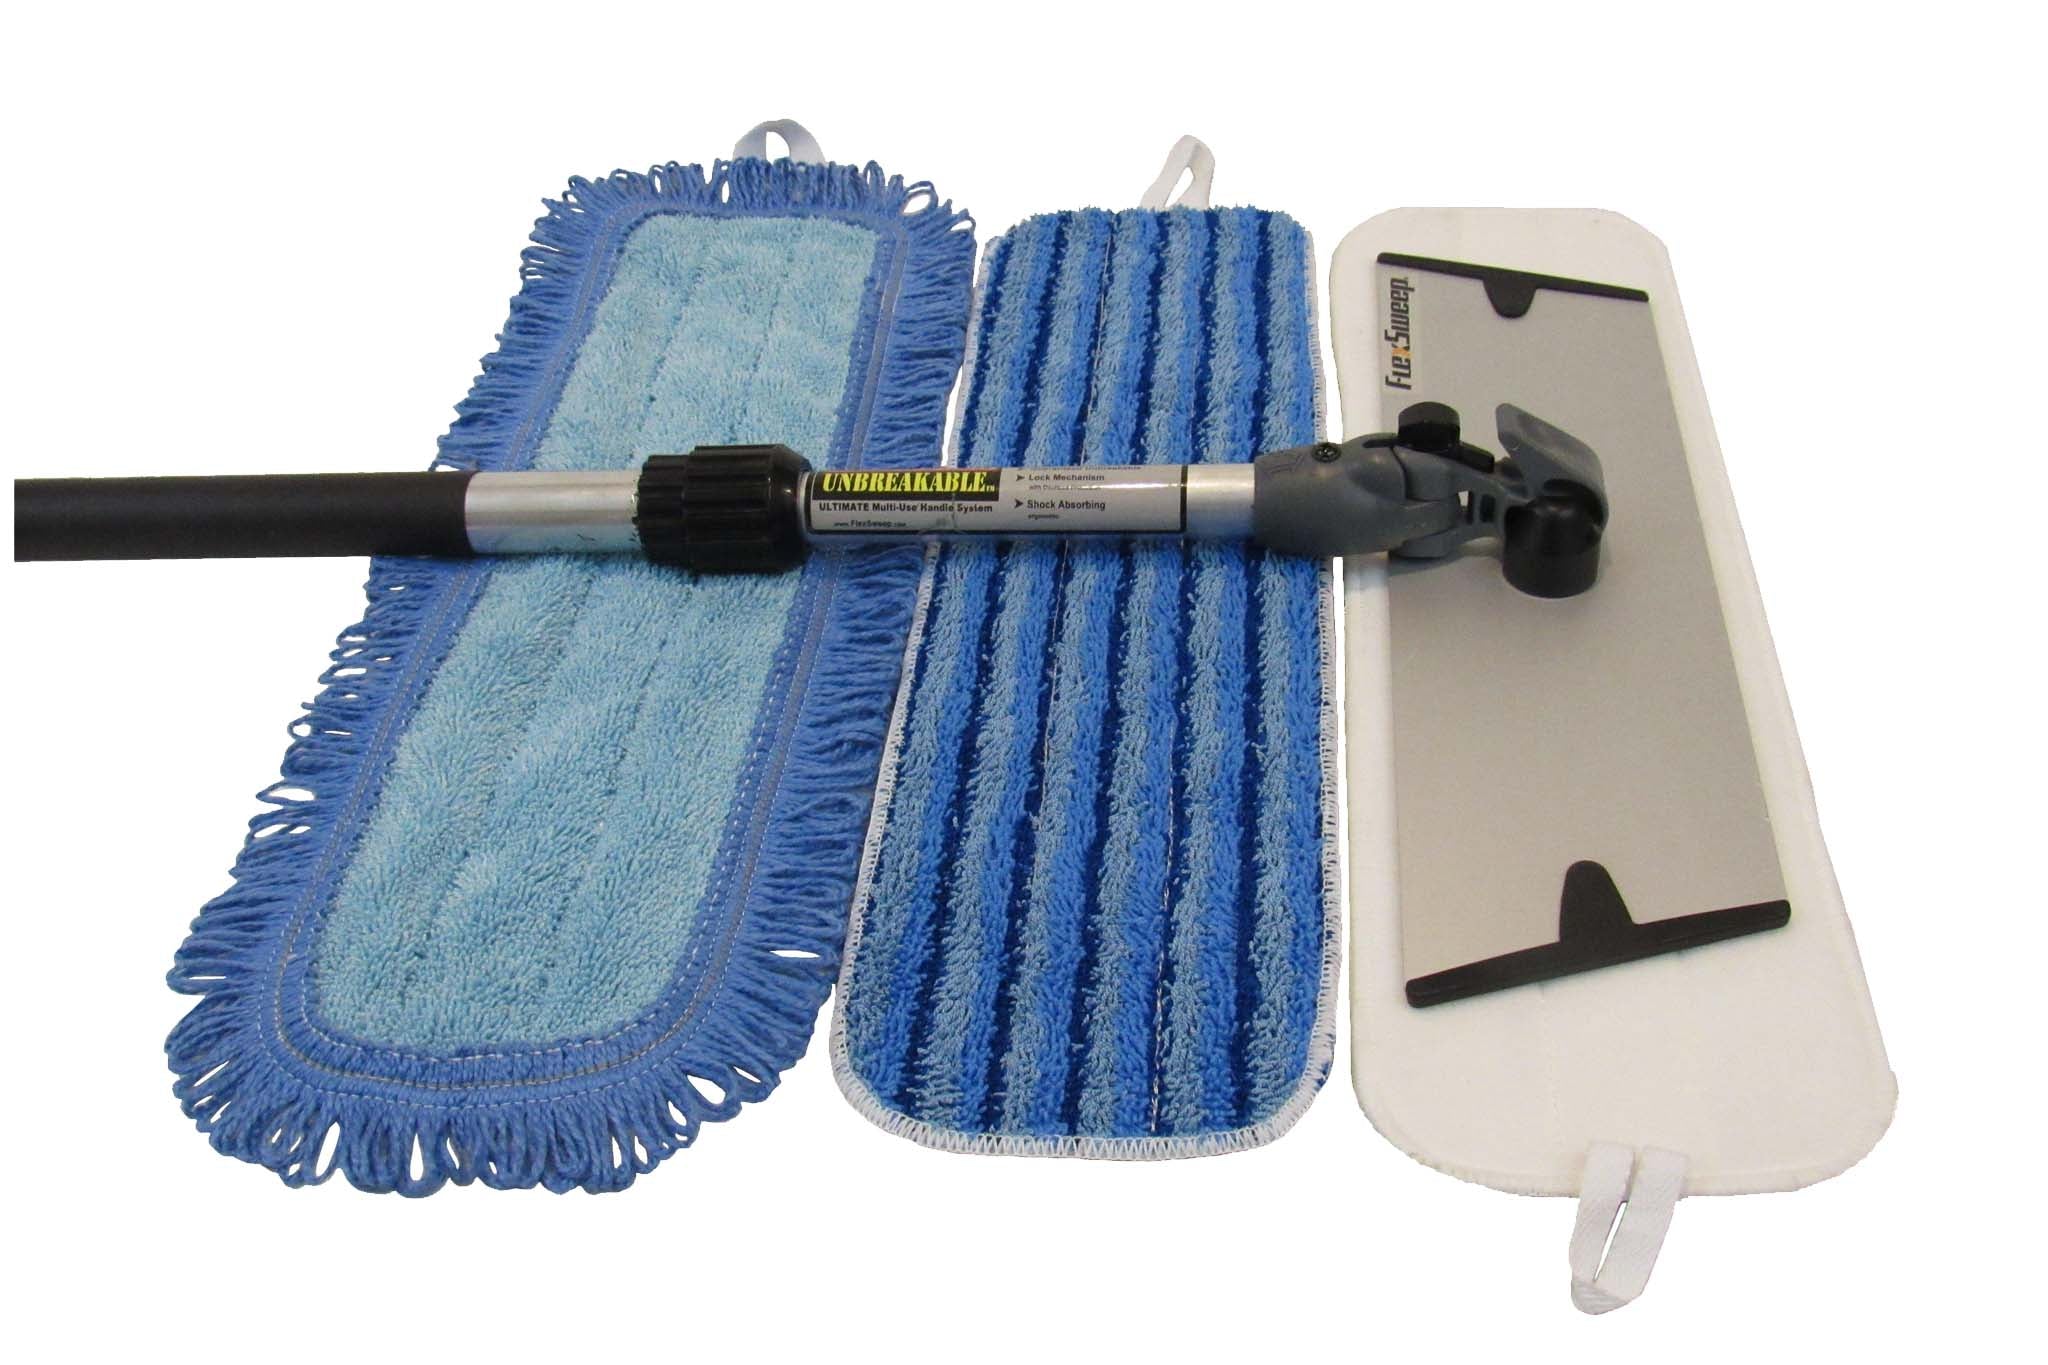 FlexSweep Commercial Patented Easy-Clean Microfiber Flat Mop (Virtually Unbreakable) Adjustable Height Handle, Easily Snap-On 18 inch Frame, 2